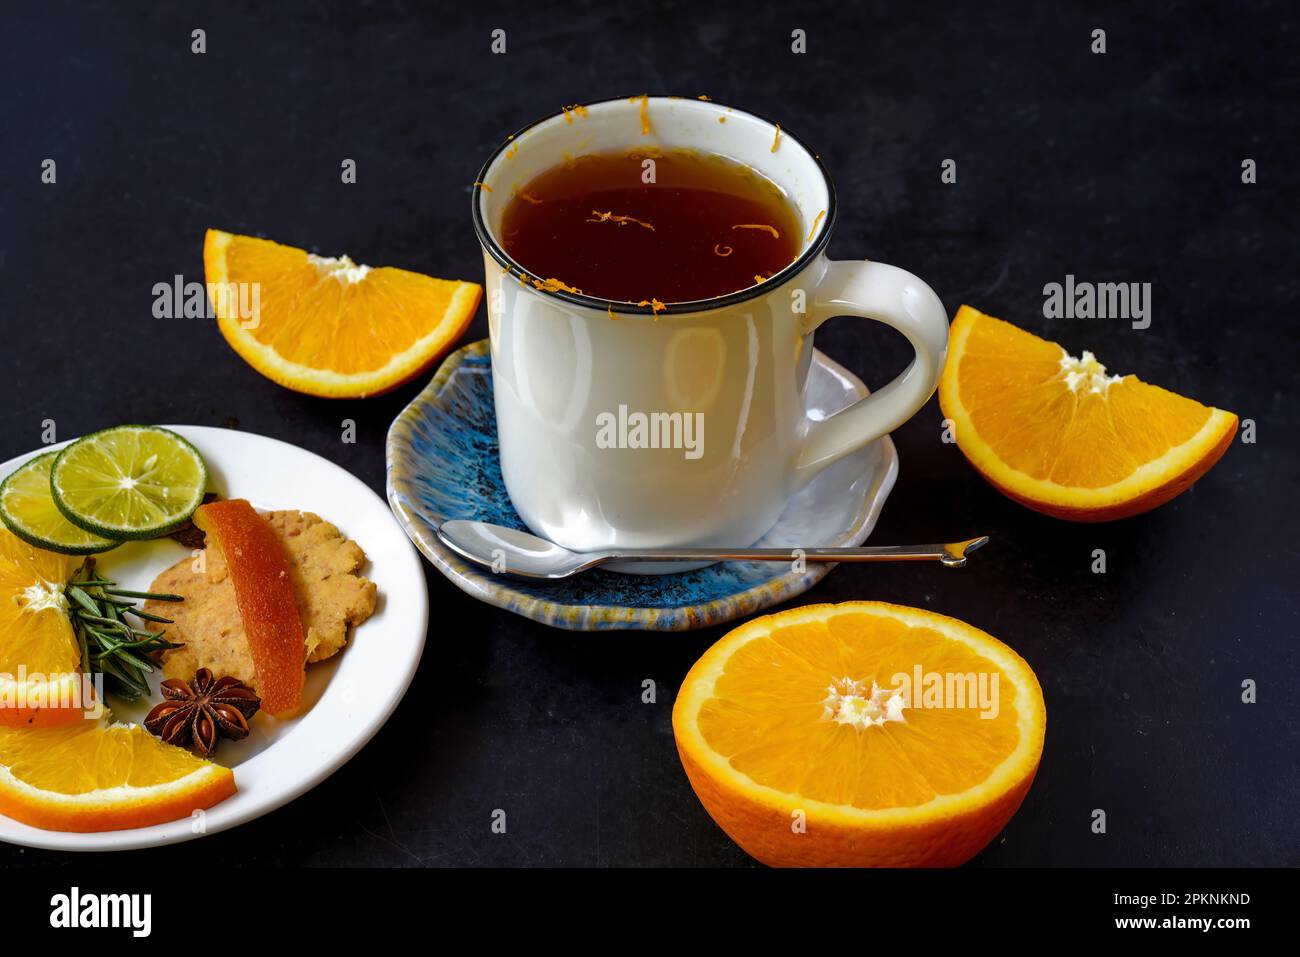 Orange cinnamon tea with crystalized fruits and cookies on black bacground Stock Photo